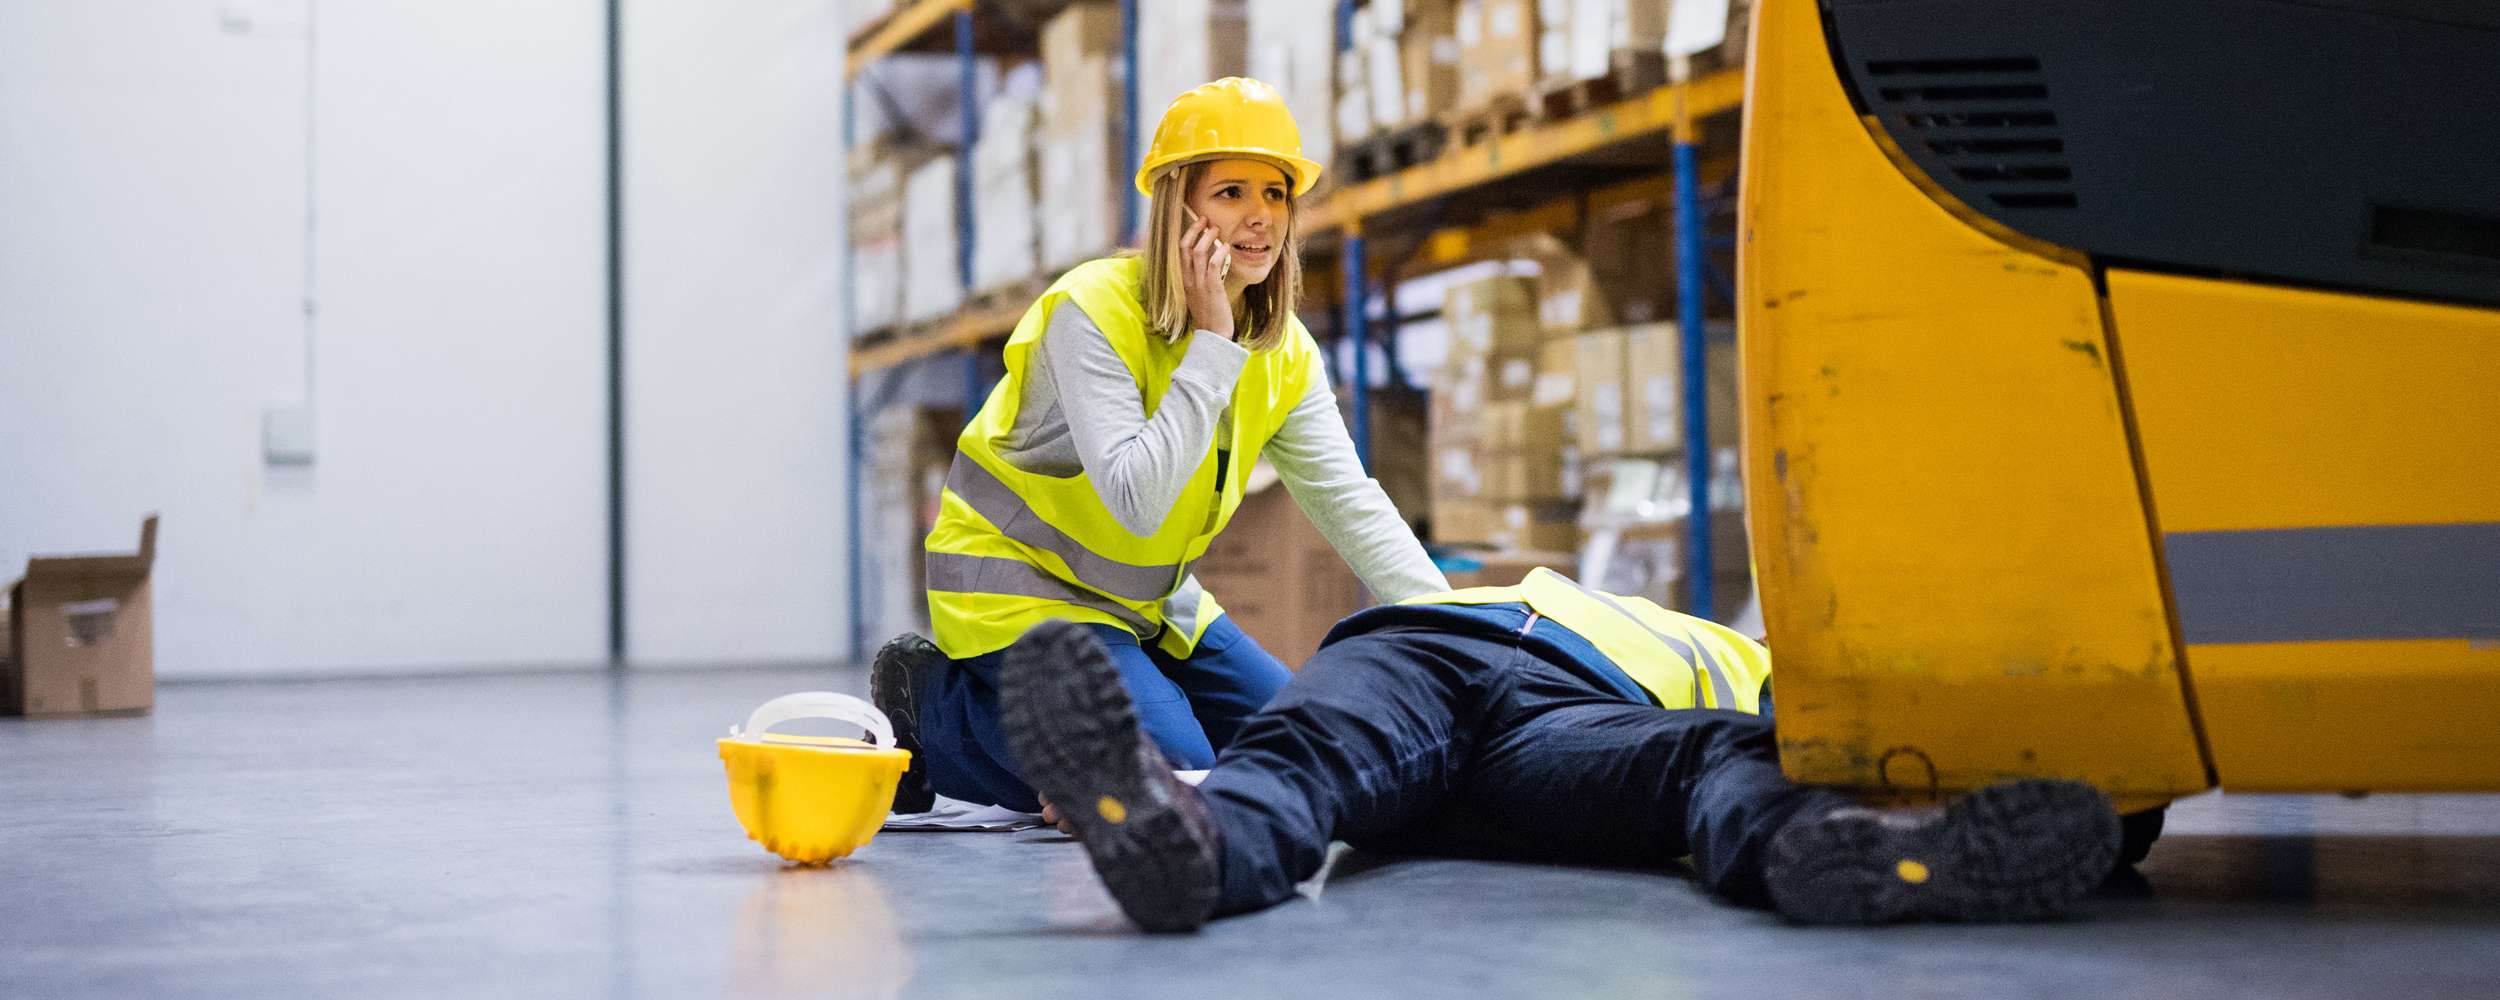 warehouse workers after an accident in a warehouse